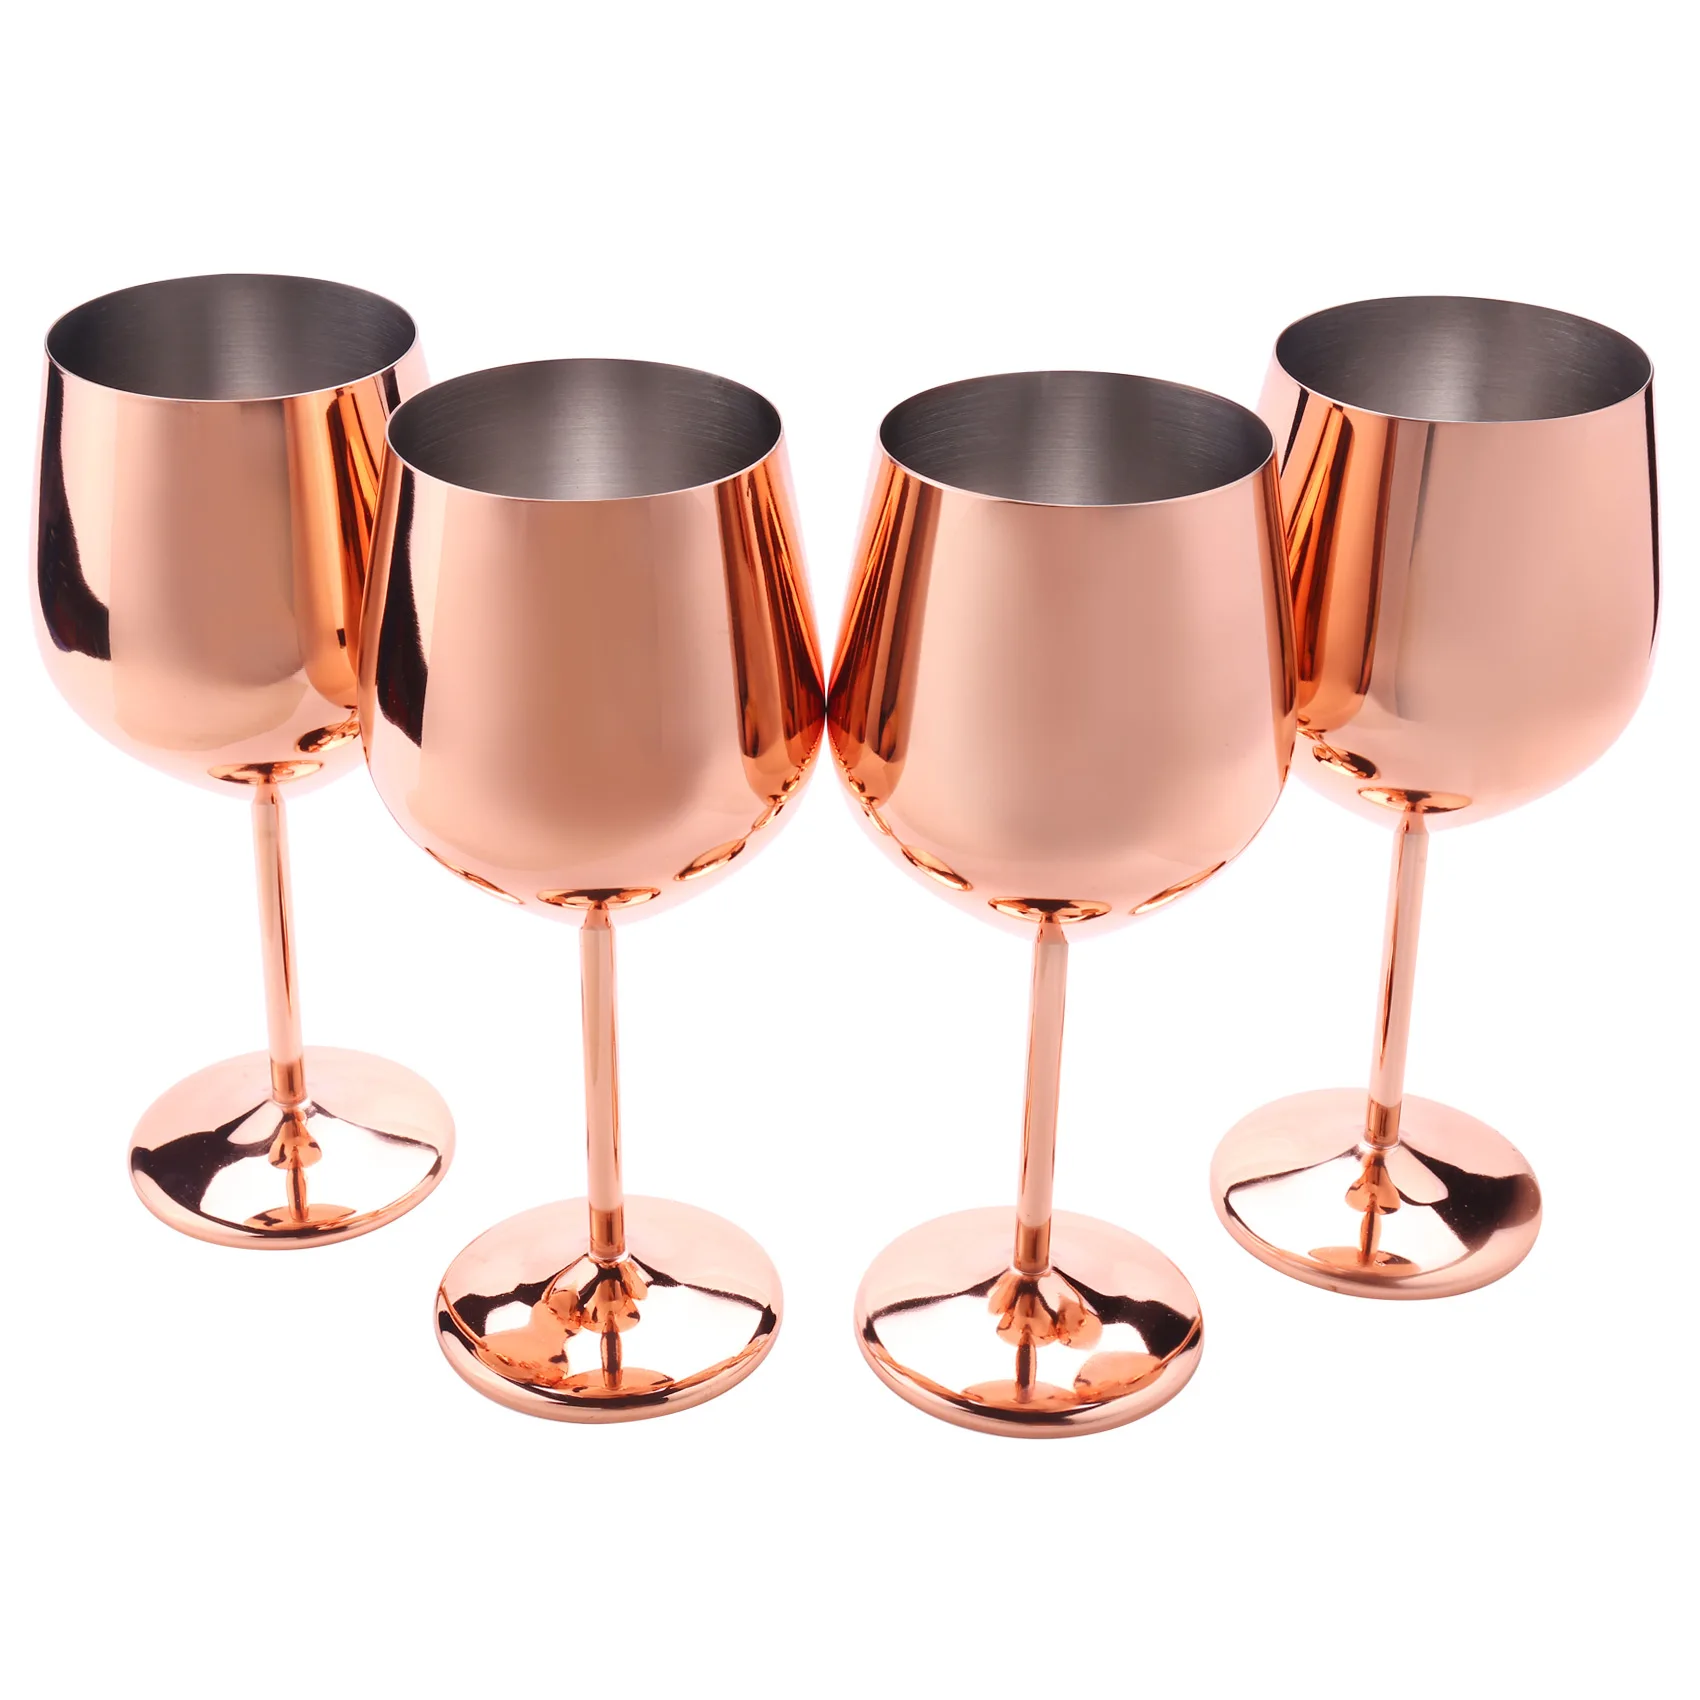 

Wine Glass Set of 4 Stainless Steel Wine Glasses, Party Cups, Home Kitchen Hotel Restaurant Quality, 500Ml / 17 Ounces